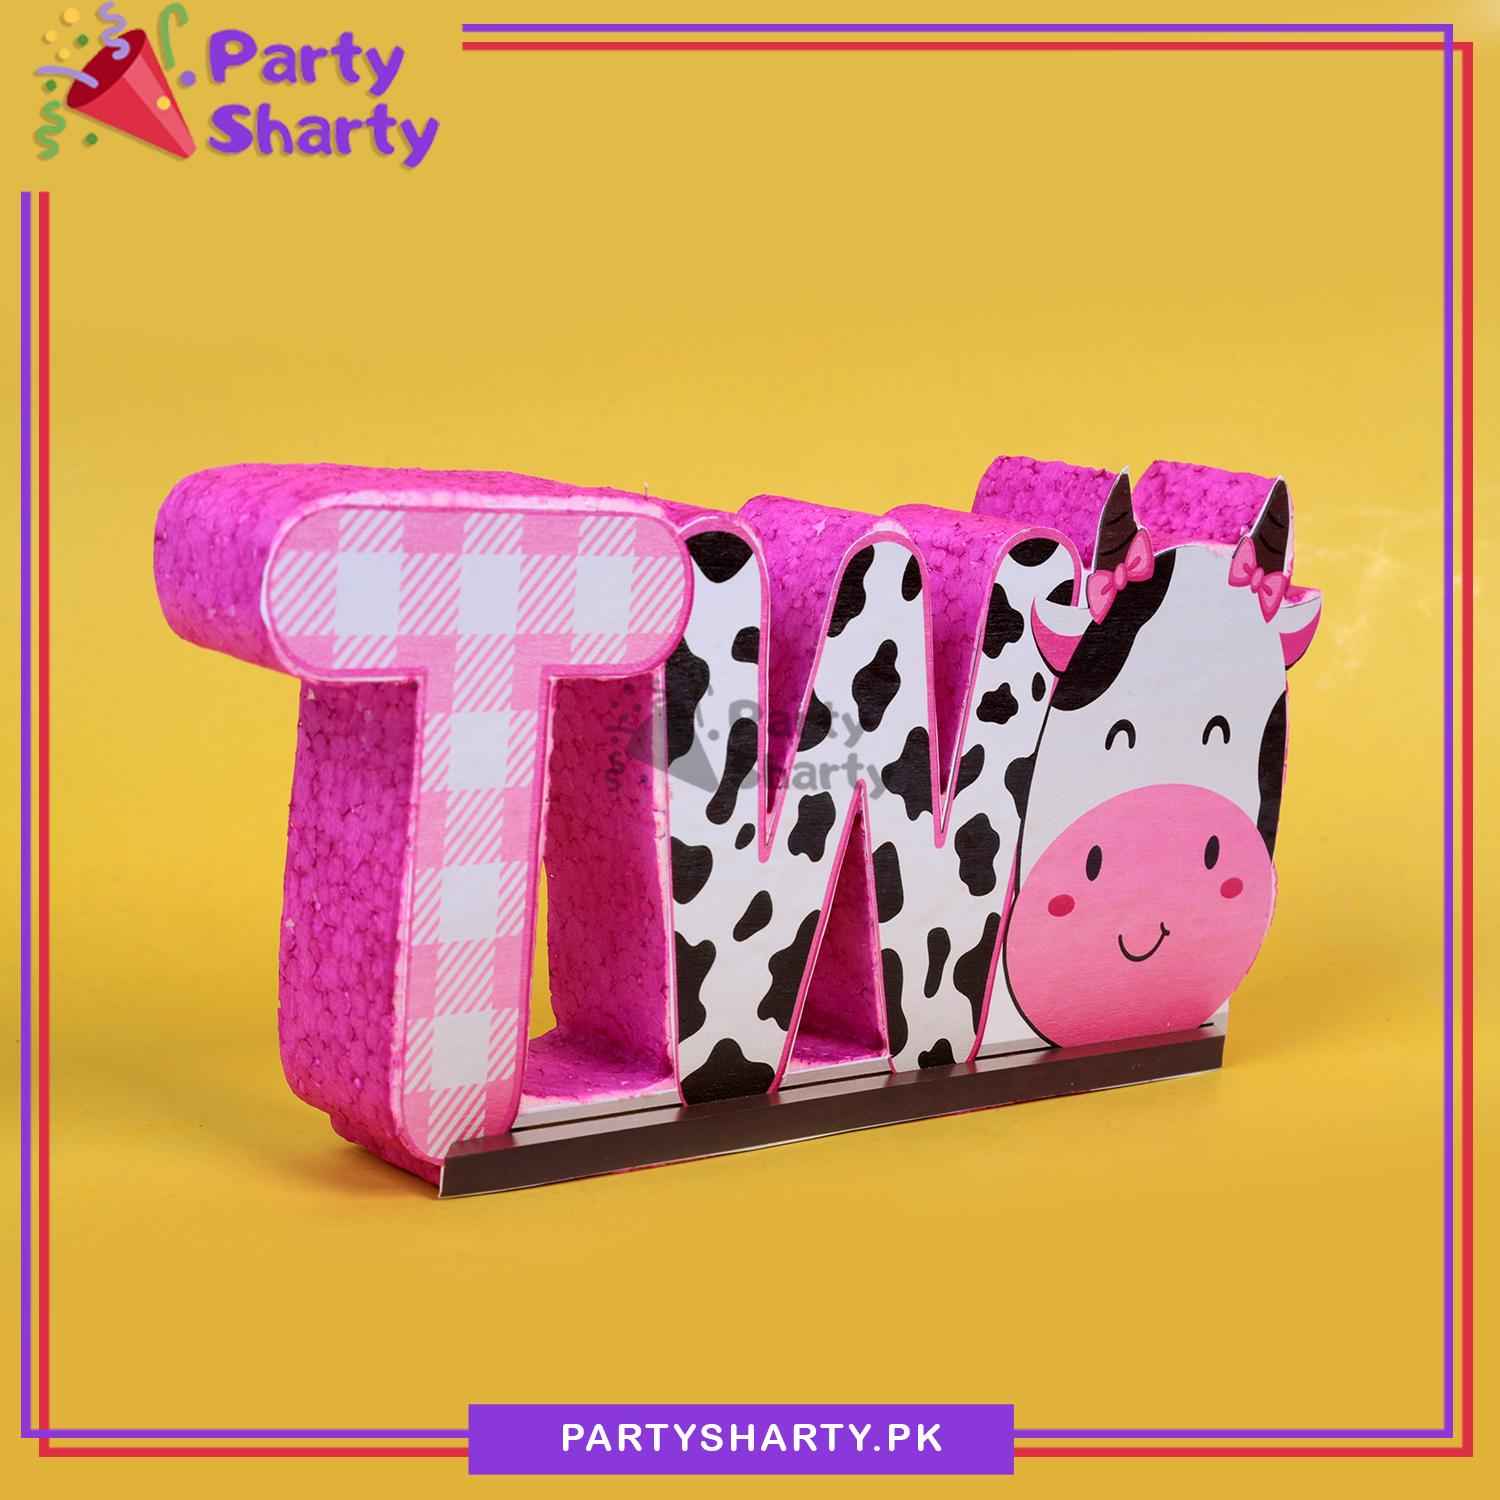 TWO Cow Theme Thermocol Standee For Jungle/Farm Theme Based Second Birthday Celebration and Party Decoration